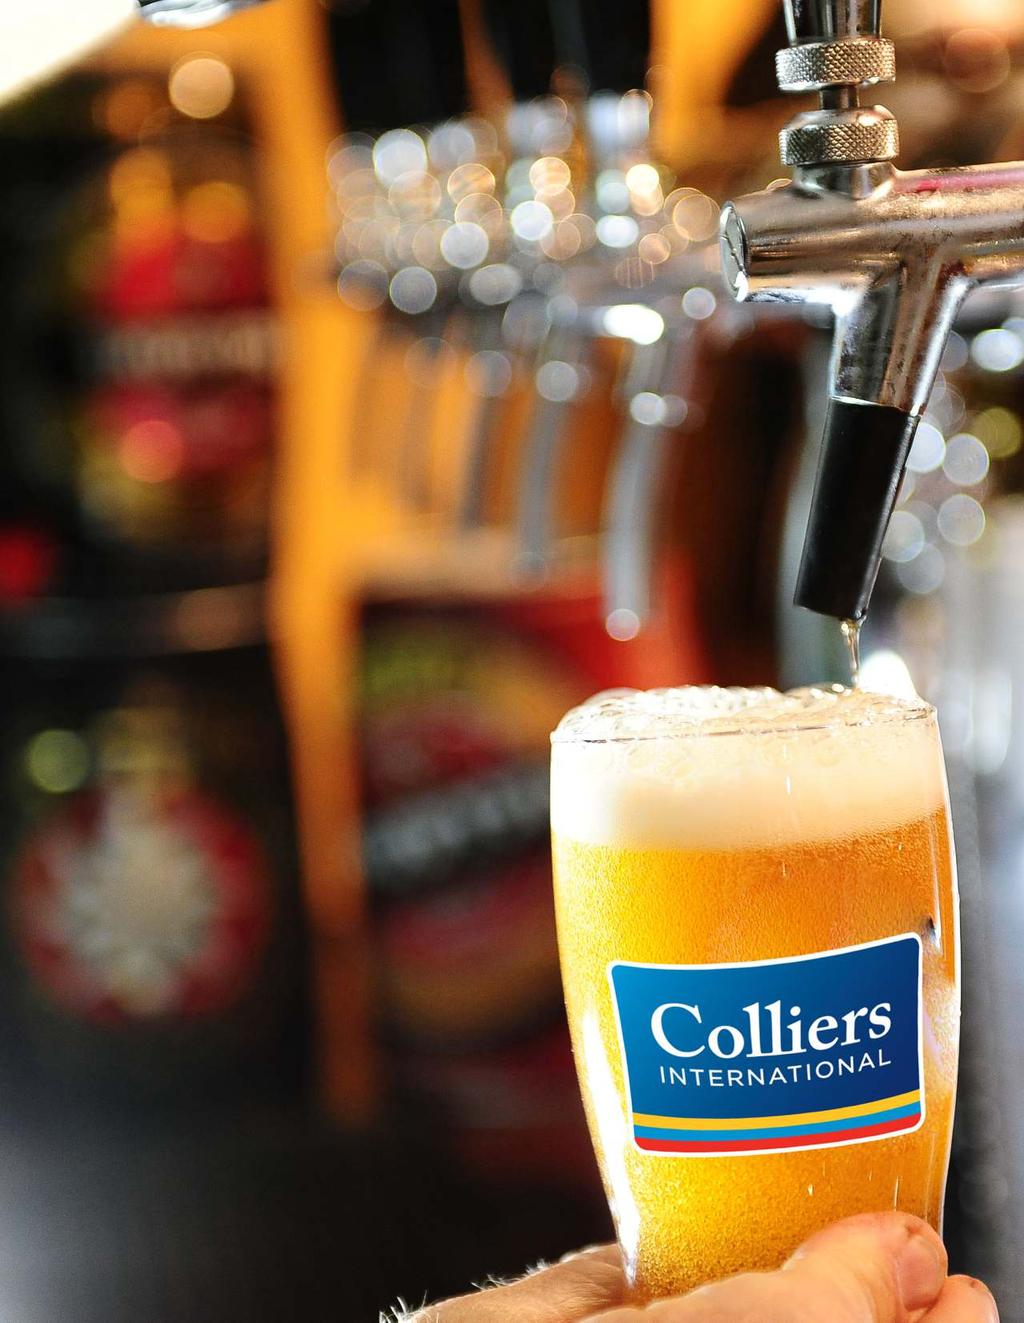 THE CRAFT BEER CRAZE IS HERE TO STAY.